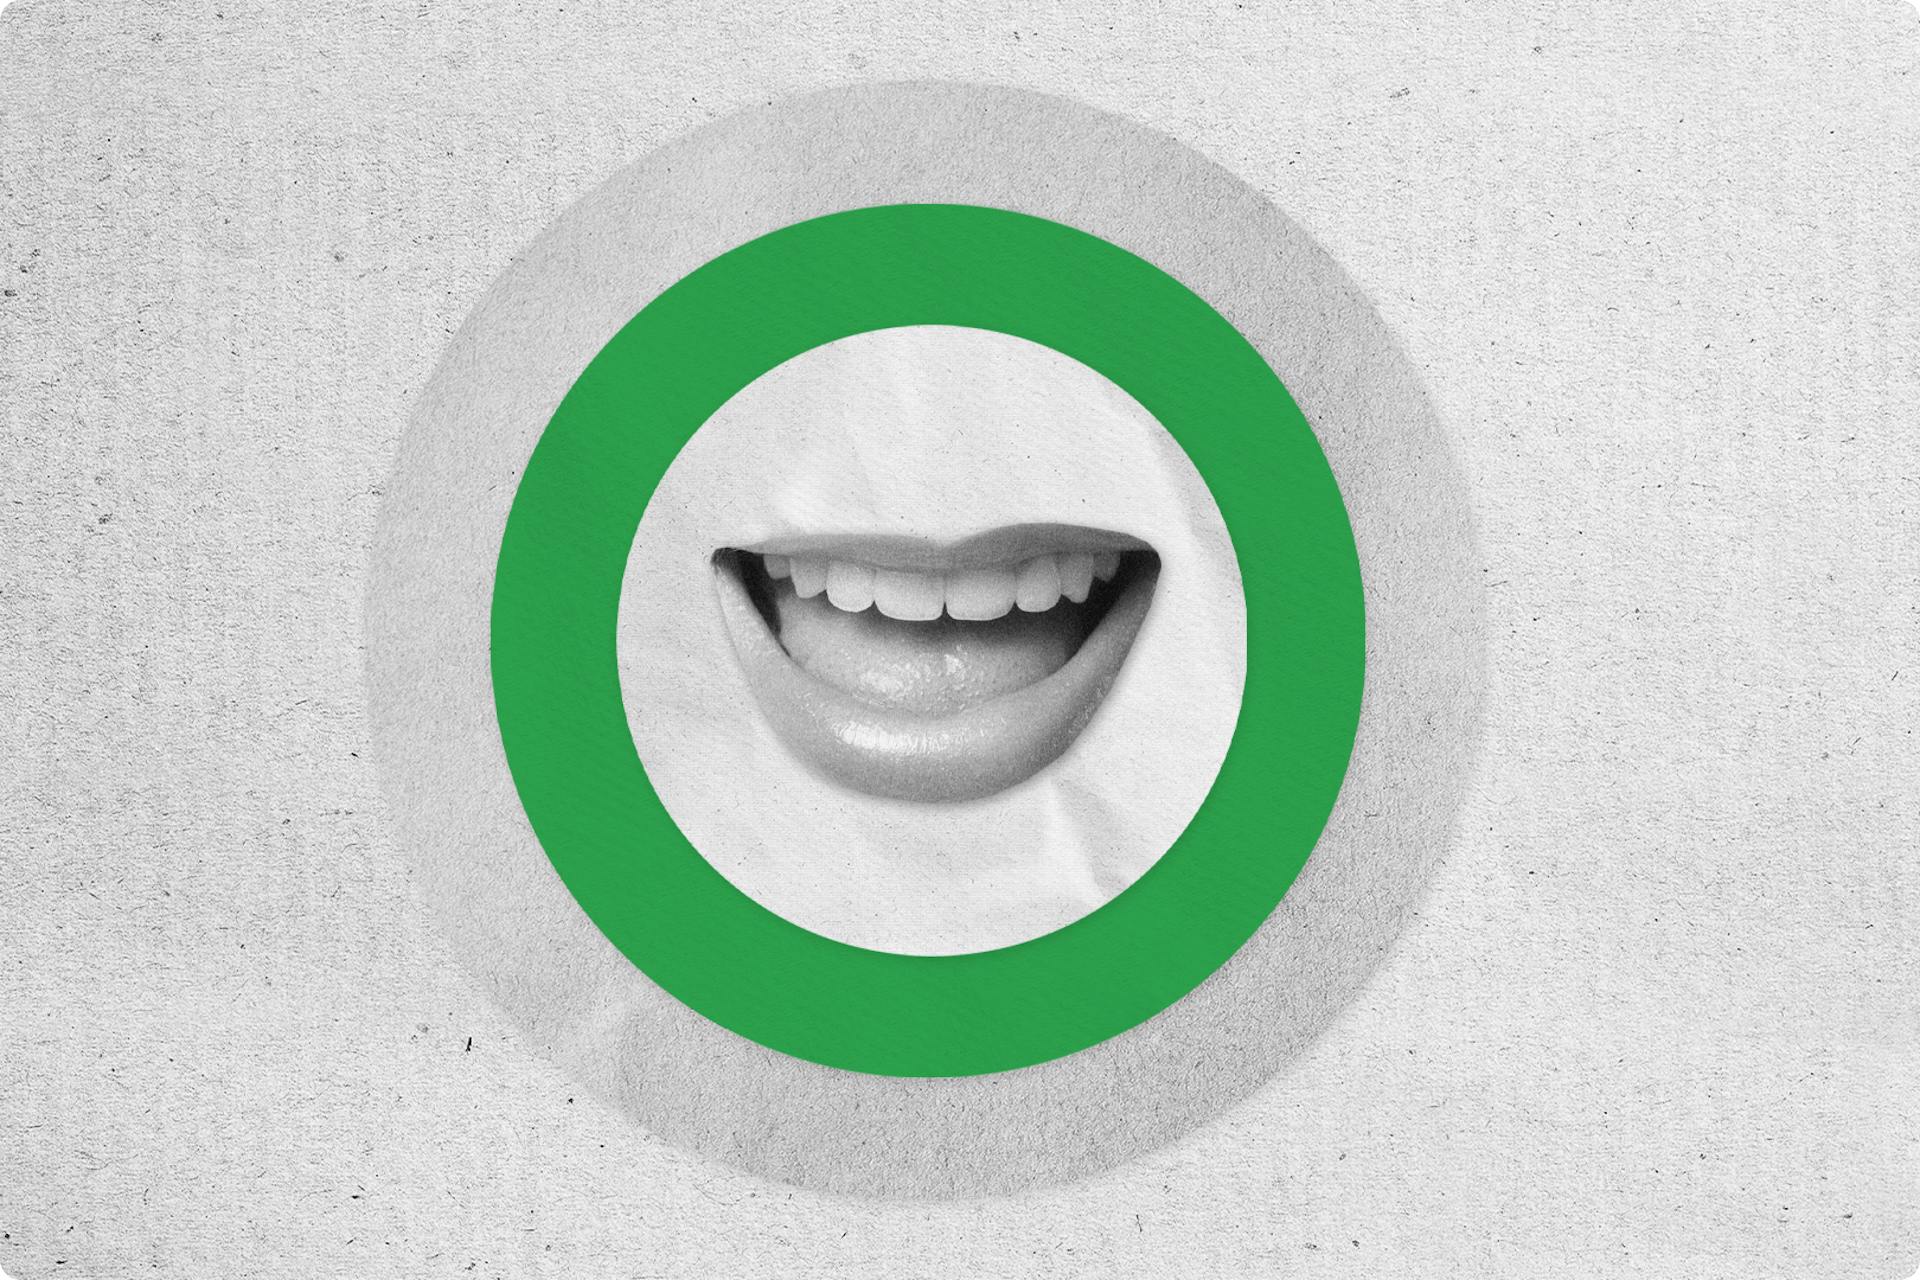 A mouth framed by a green circle